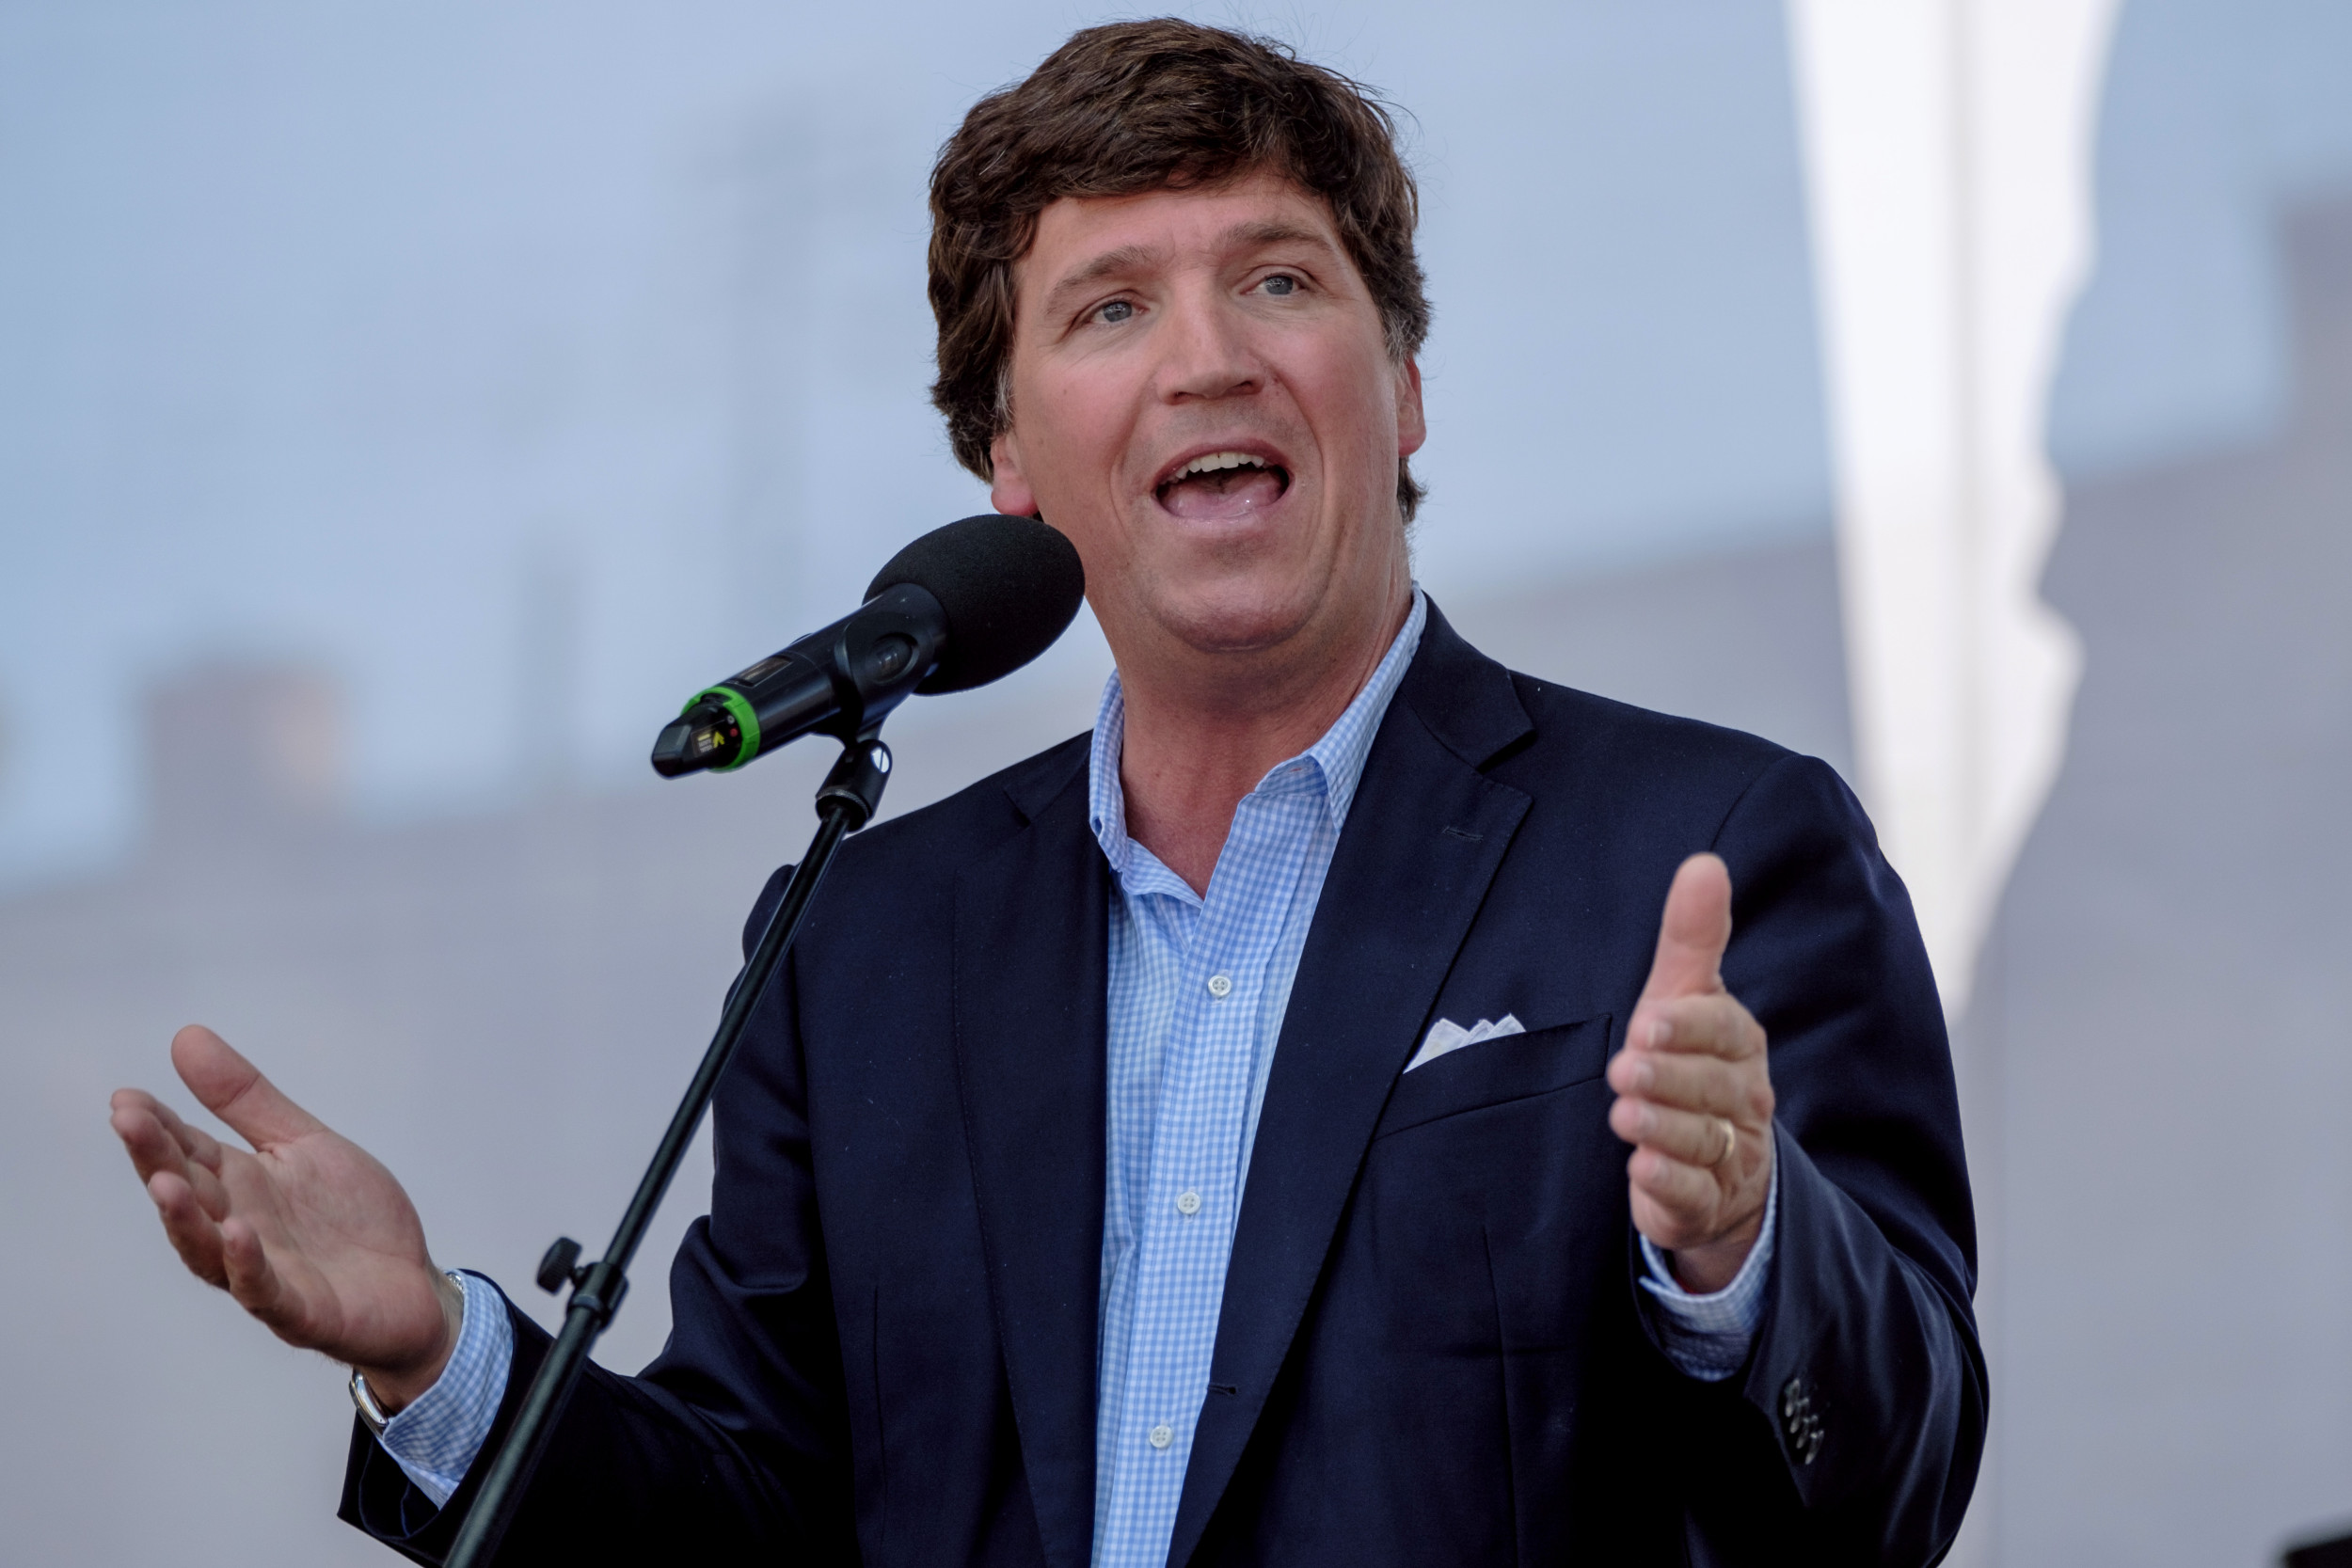 Tucker Carlson's Chances of President, According to Bookmakers